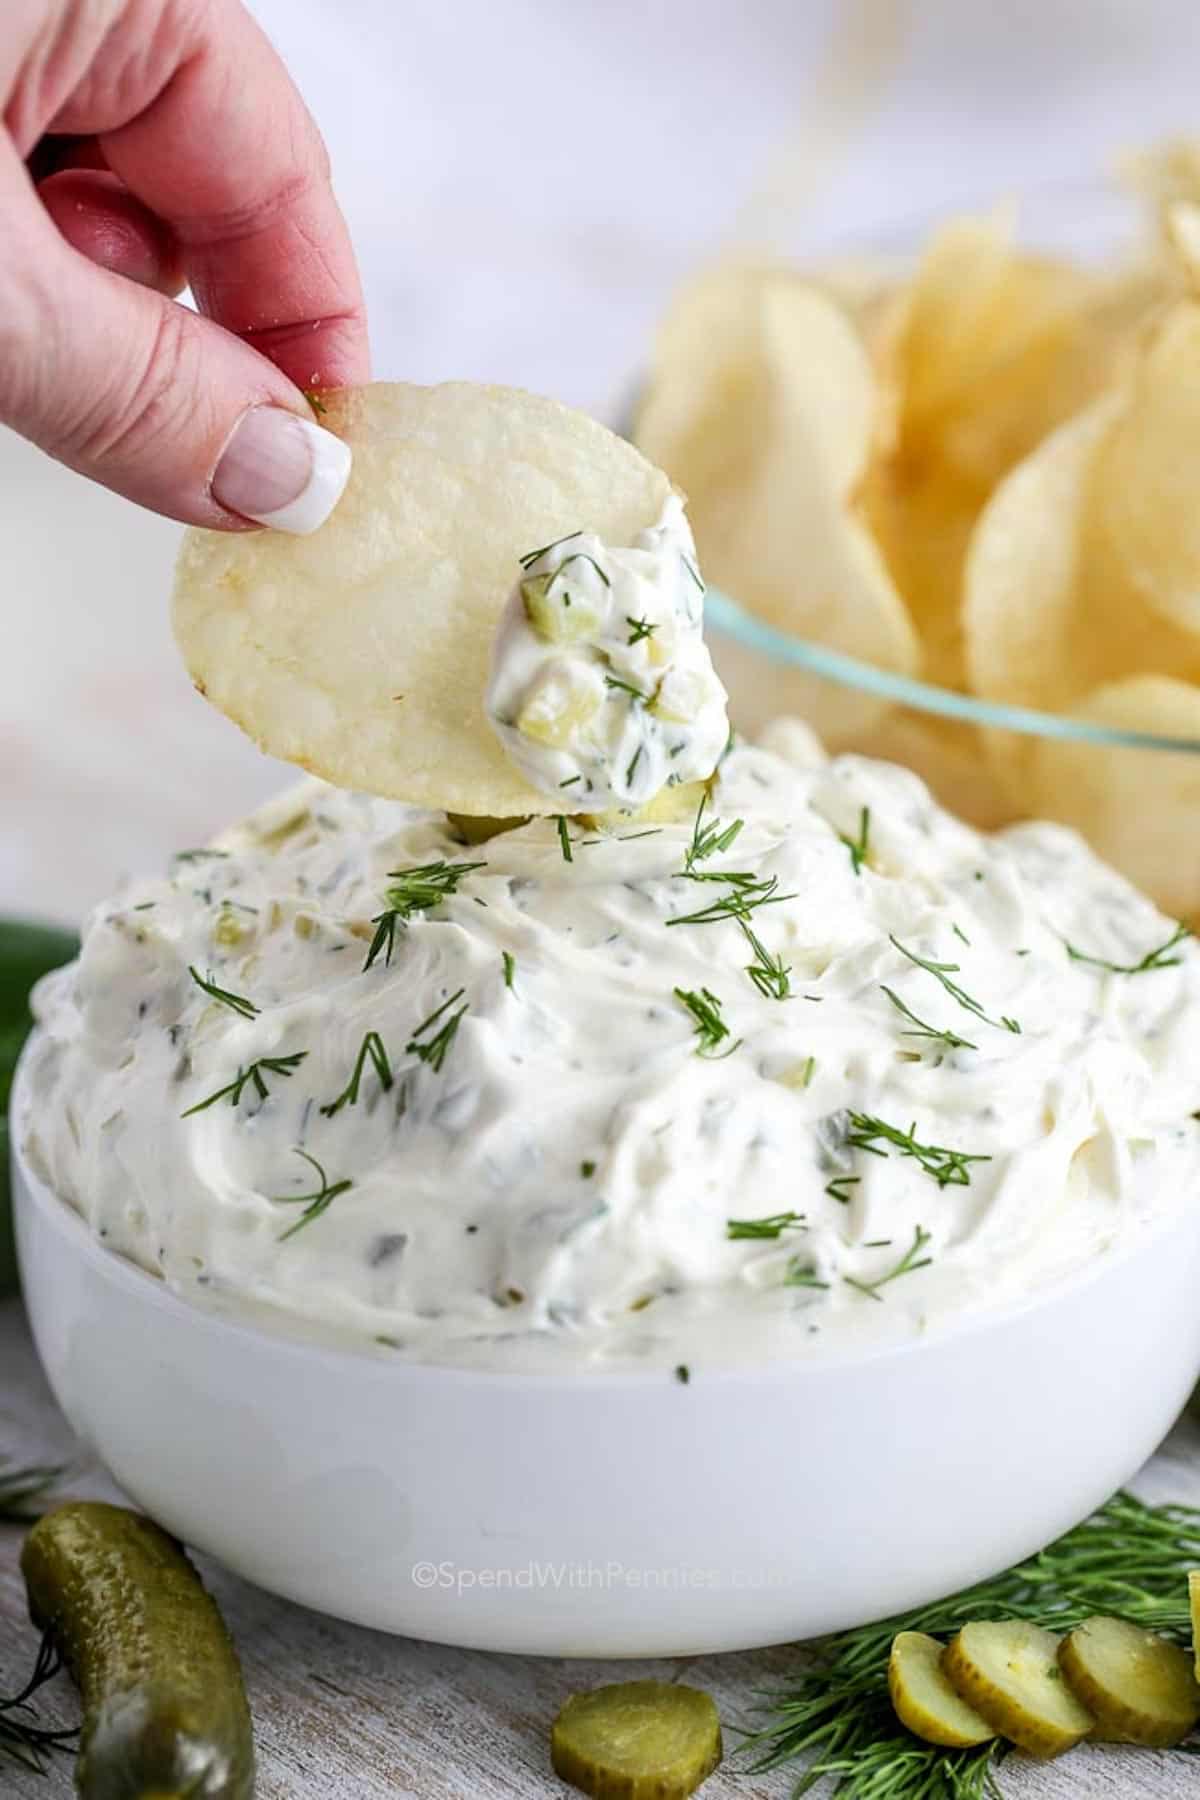 dipping a potato chip into a bowl of dill pickle dip